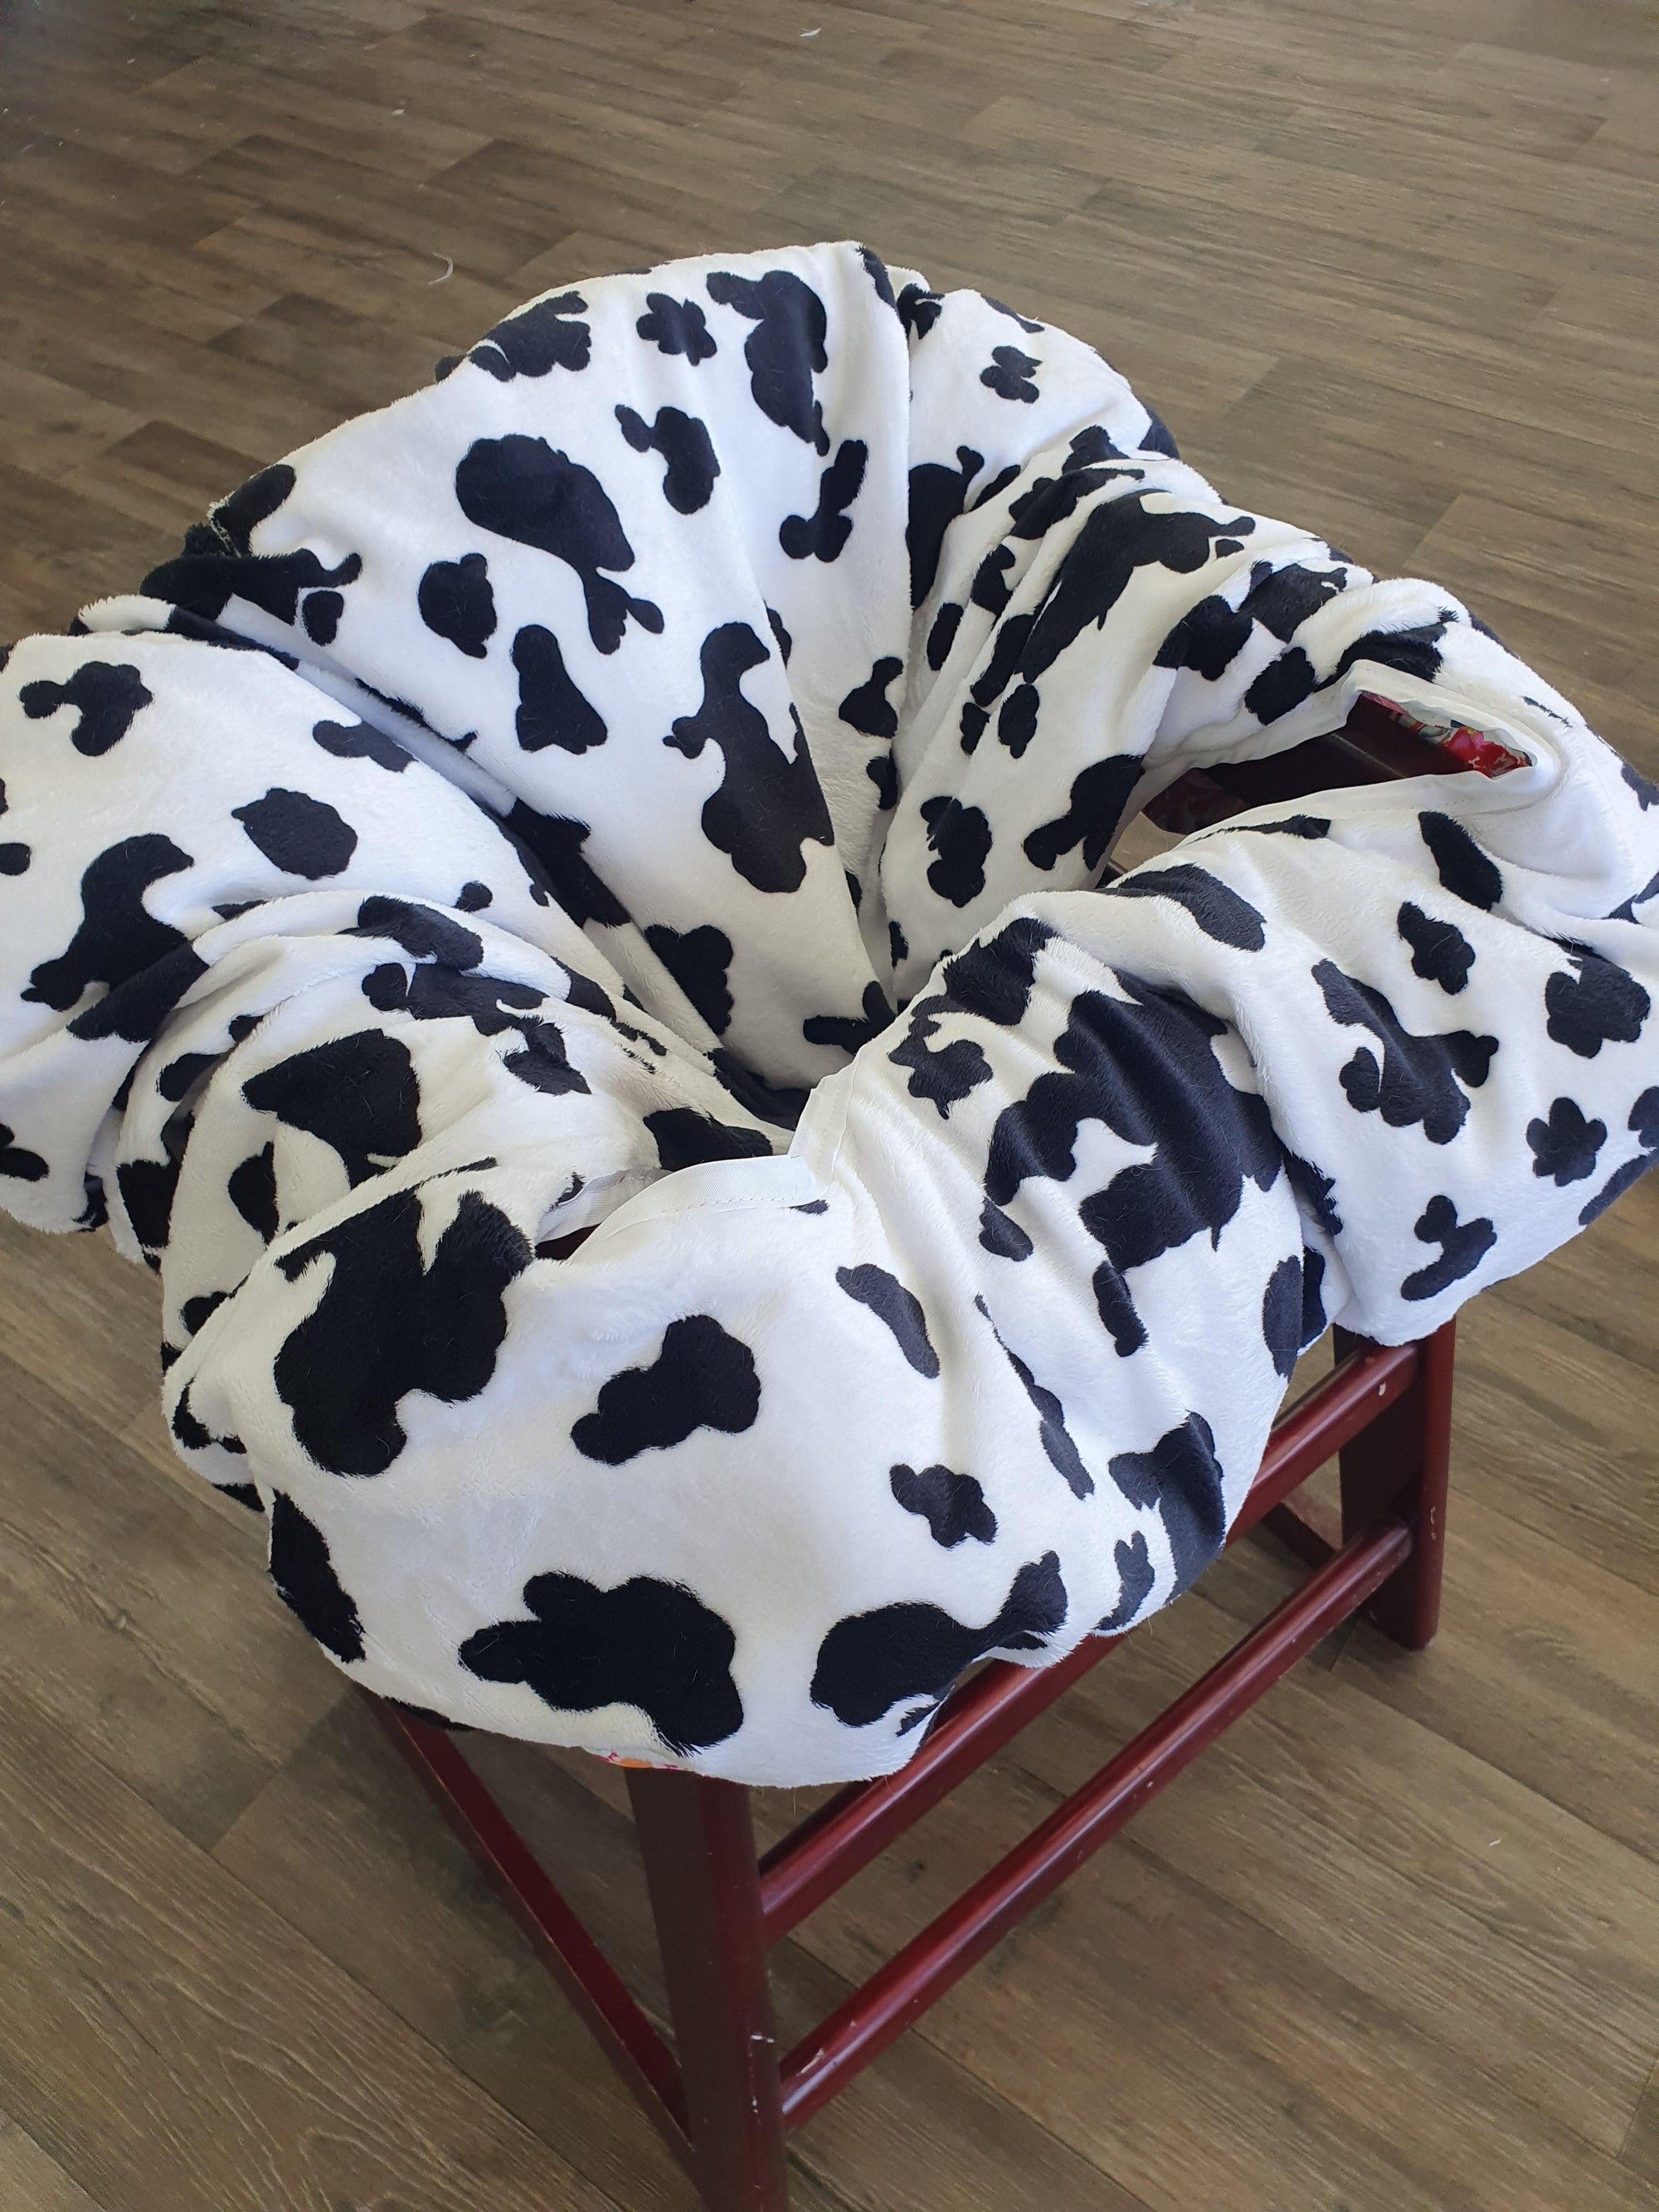 Cart Cover- Black White Cow Minky Highchair/Cart Cover - DBC Baby Bedding Co 